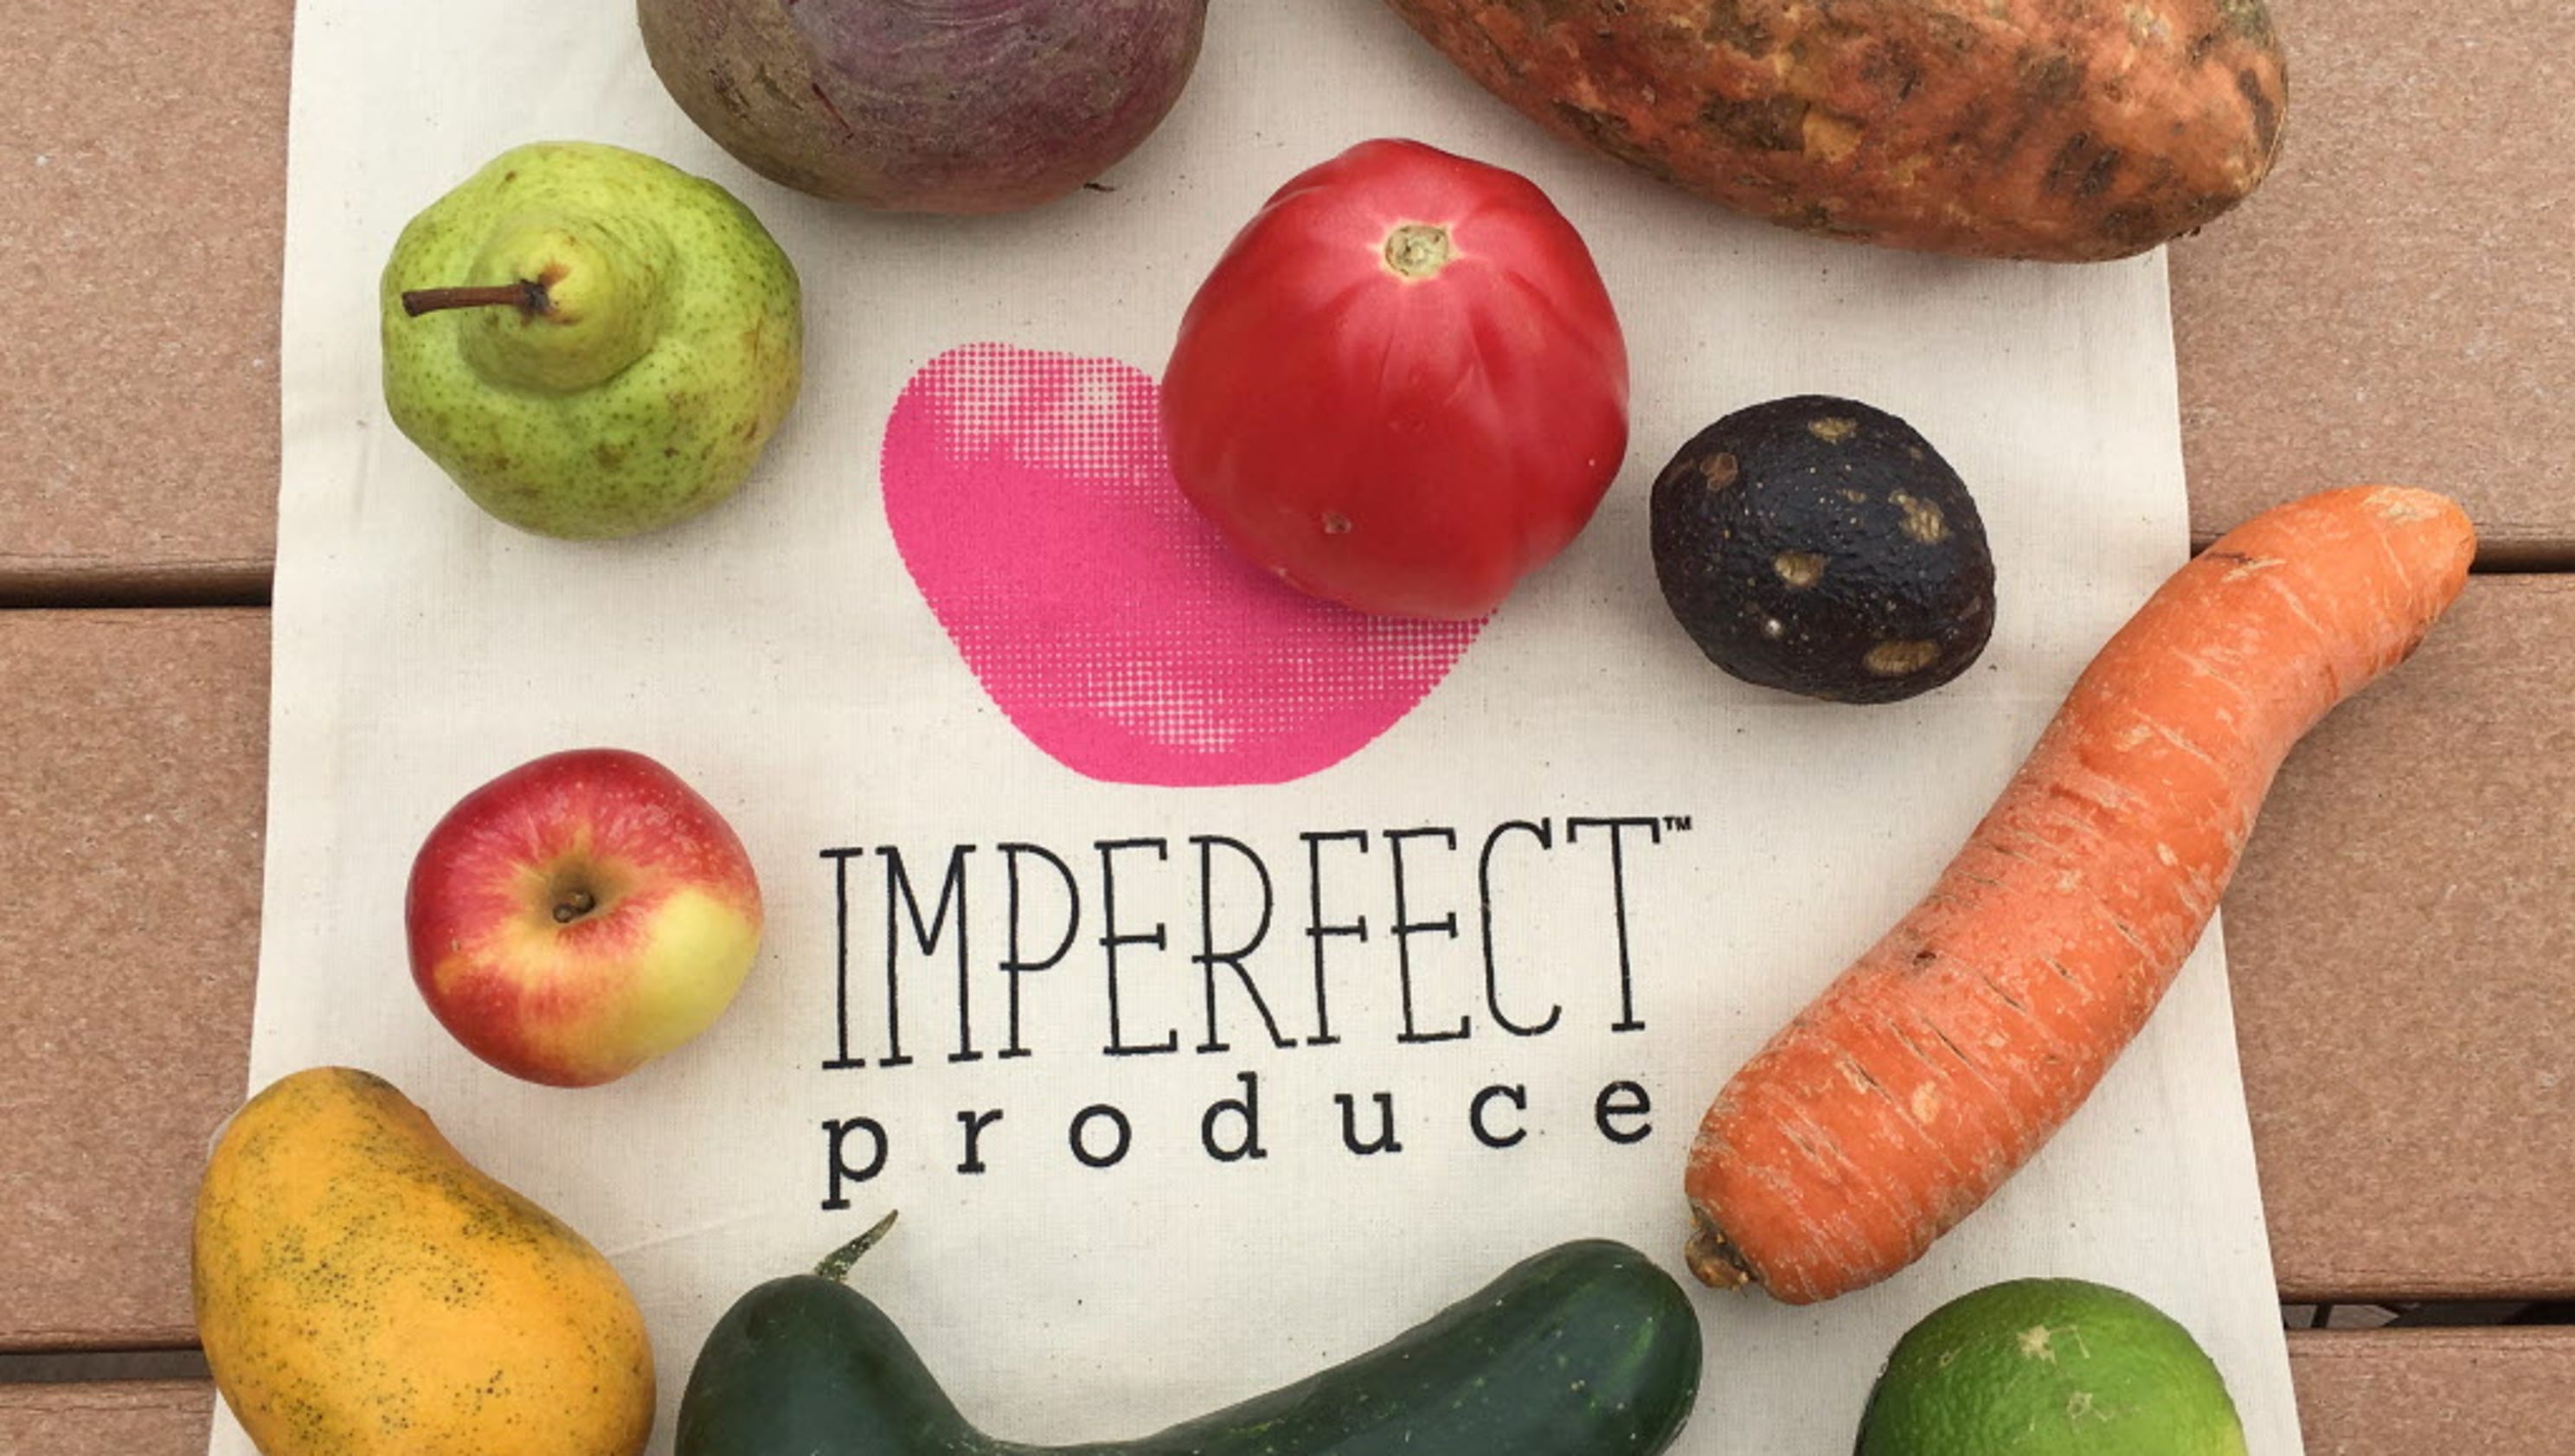 Ugly Produce: Imperfect Fruits and Veggies Are Beautiful | New Denizen